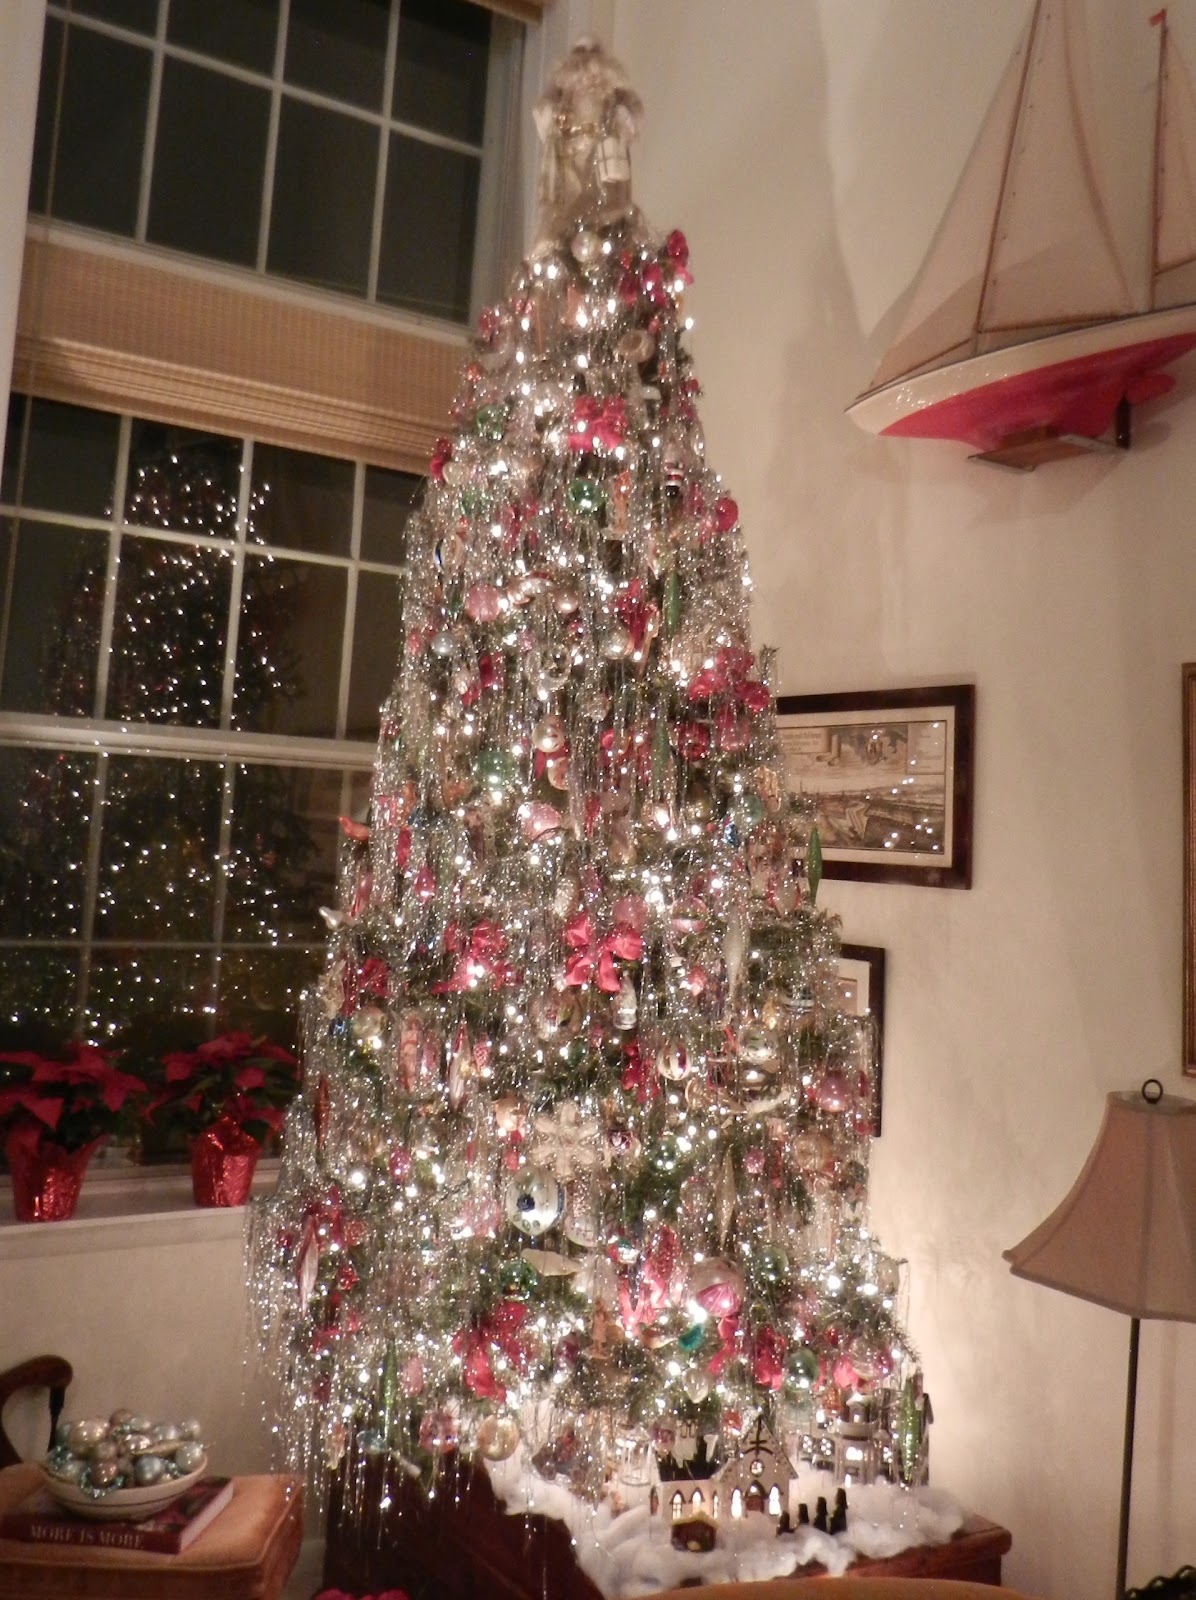 Knickerbocker Style & Design: An Old-Fashioned Christmas Tree